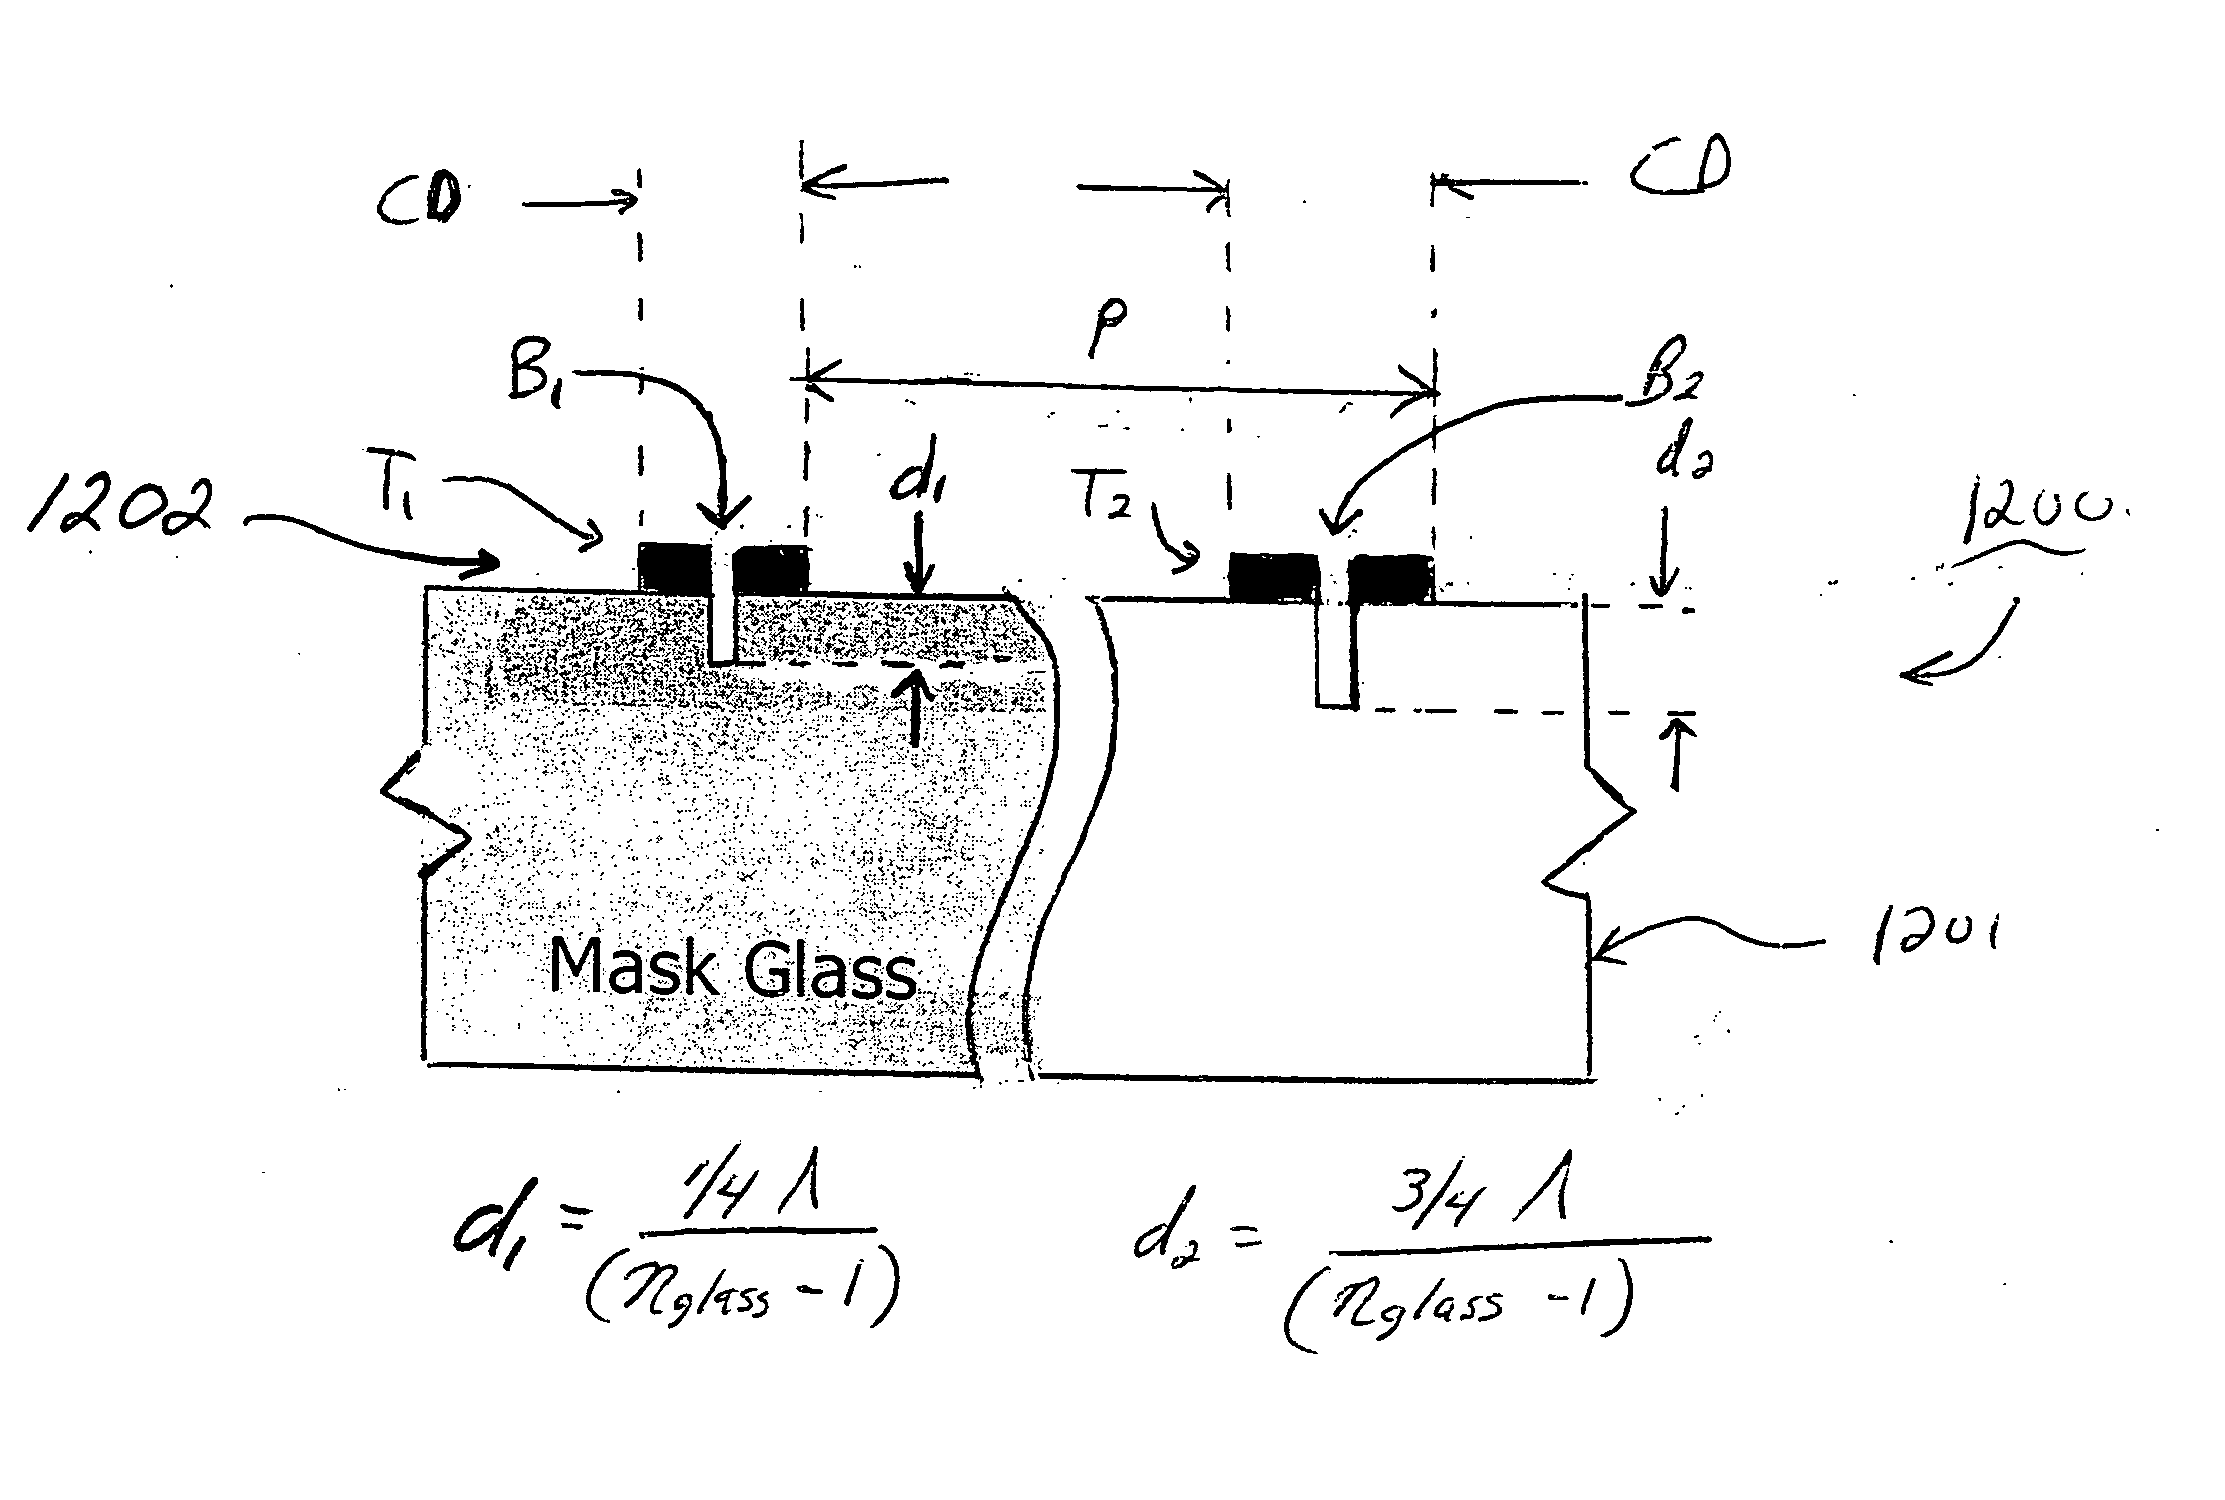 Photomask structures providing improved photolithographic process windows and methods of manufacturing same